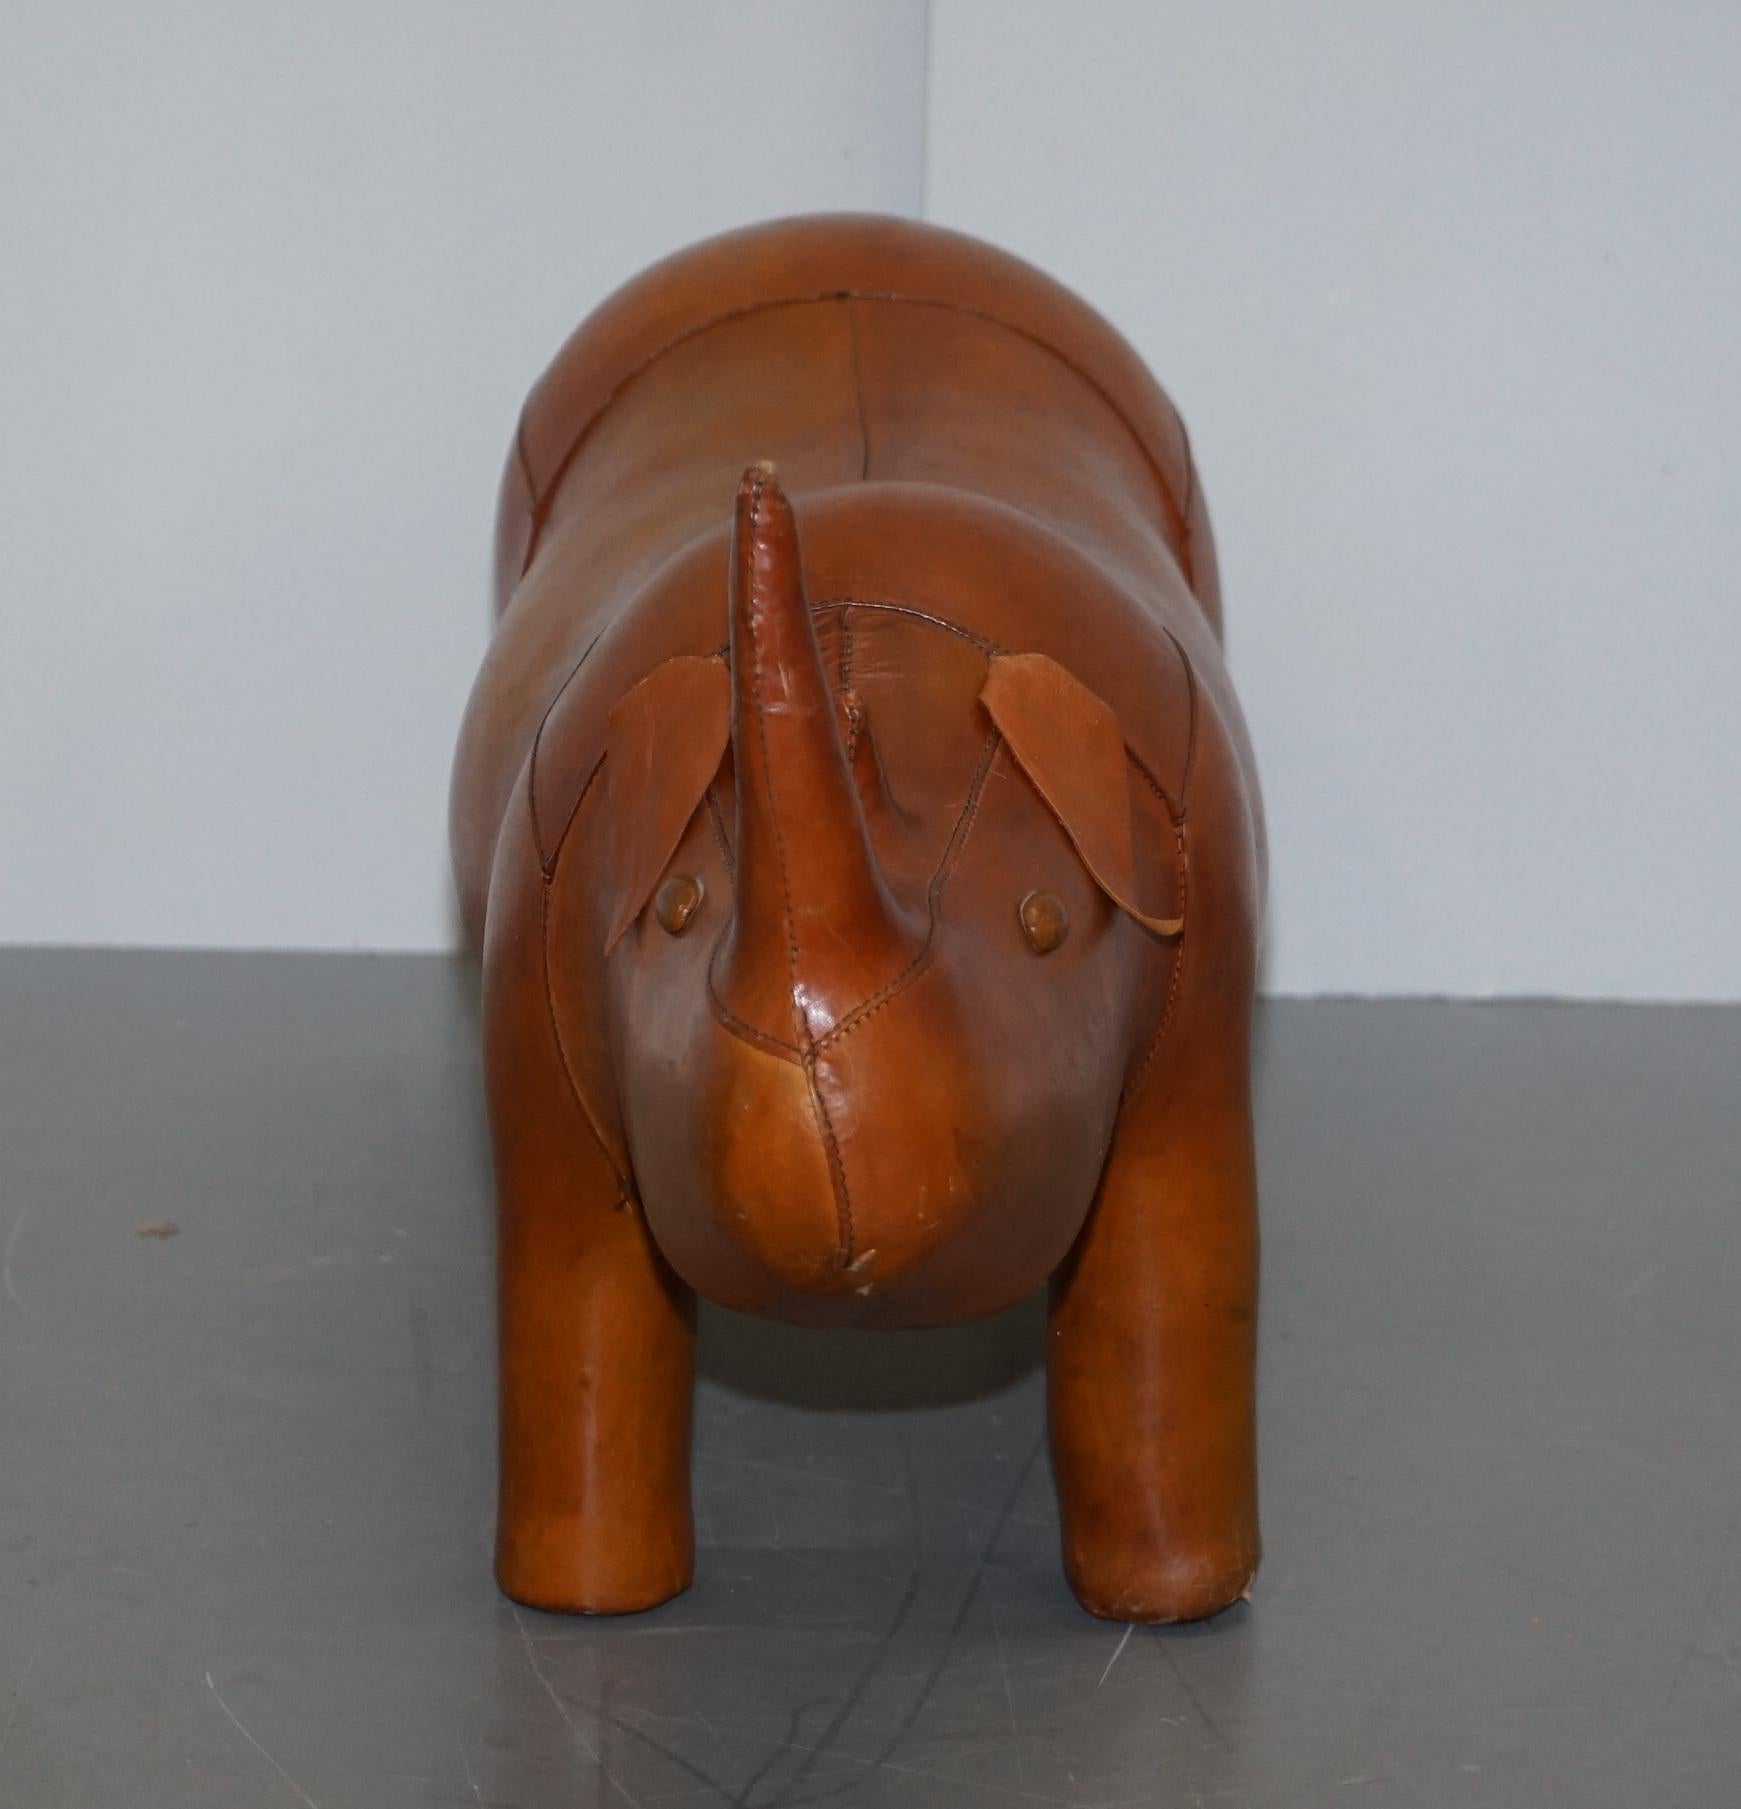 We are delighted to offer for sale this absolutely sublime original vintage Liberty’s London tan brown leather hand dyed Rhino footstool

These come in varying sizes there is a quite unpractical extra large size which is around a meter wide that’s